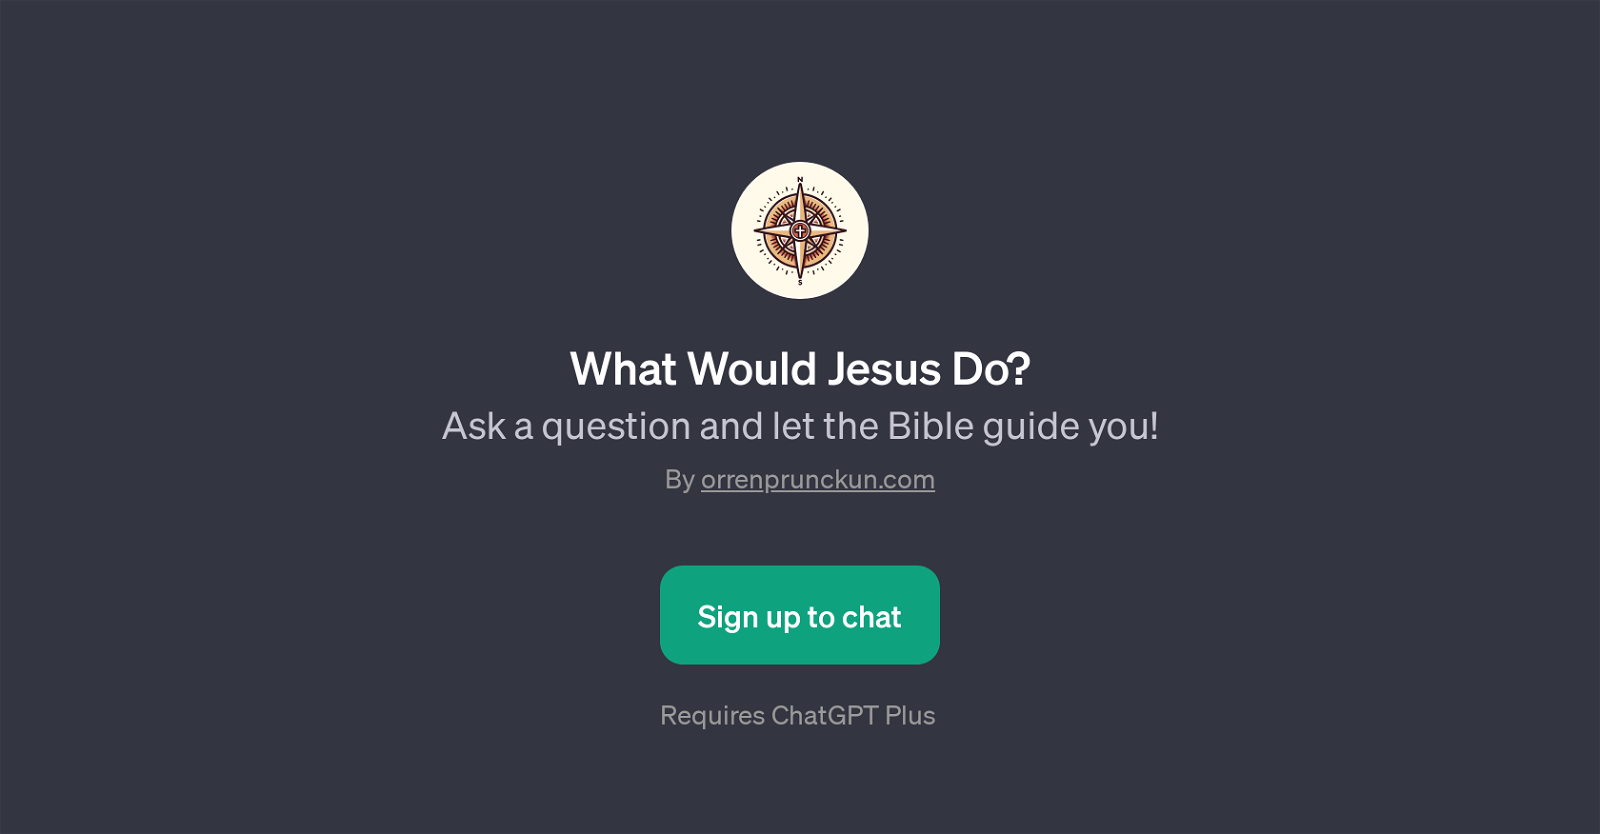 What Would Jesus Do? website